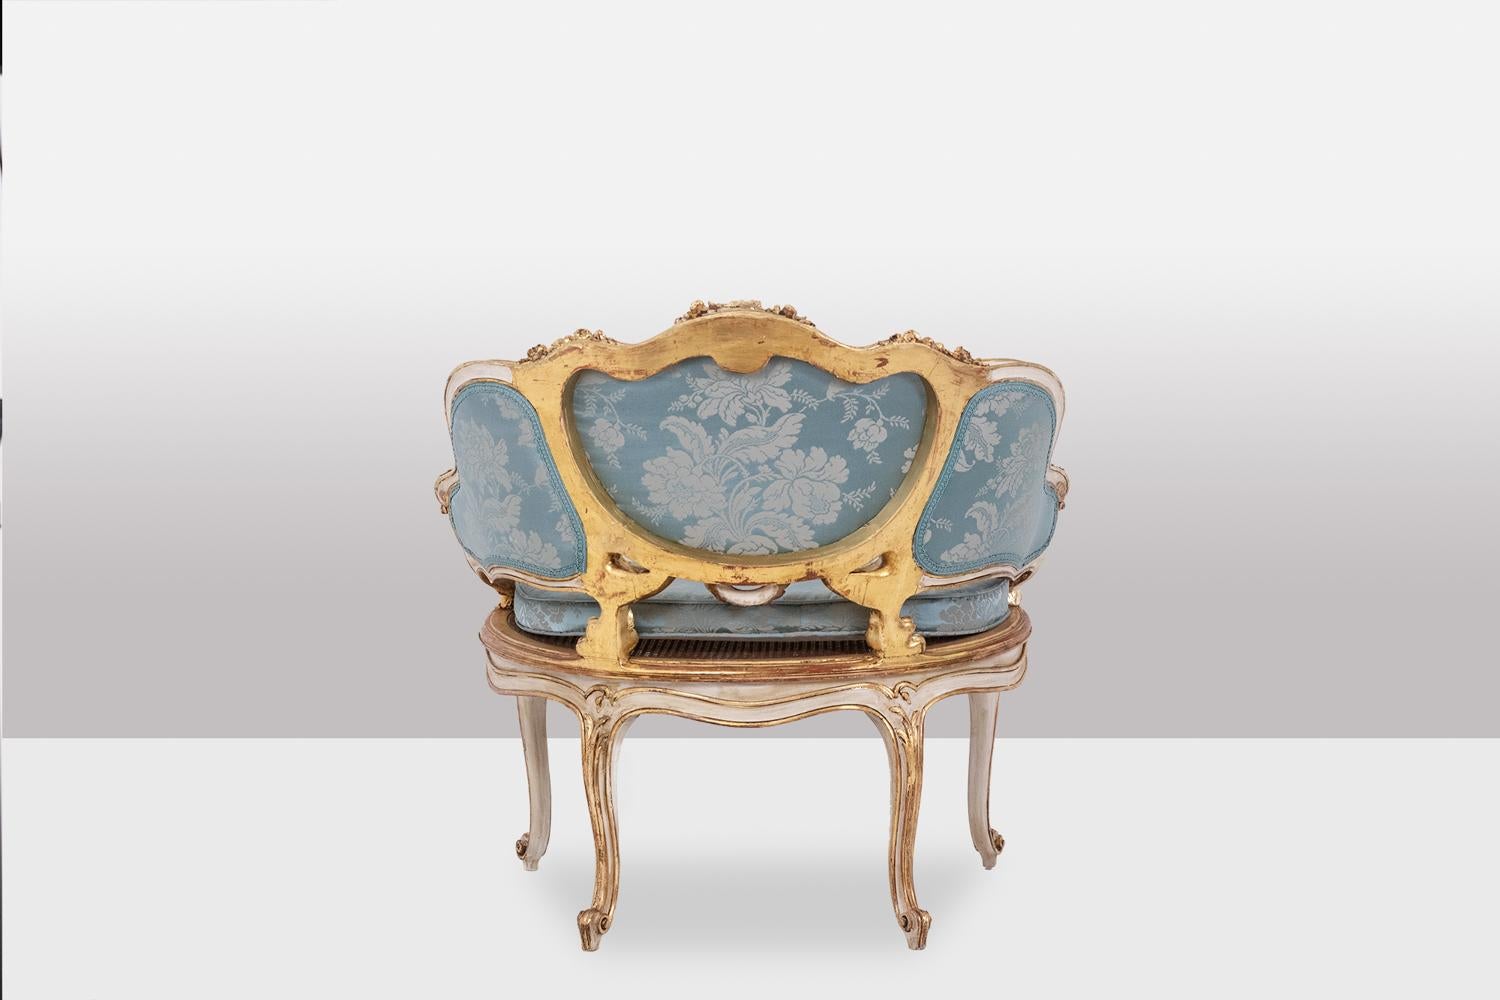 French Marquise in gilded and carved wood in the LXV style. Circa 1880.